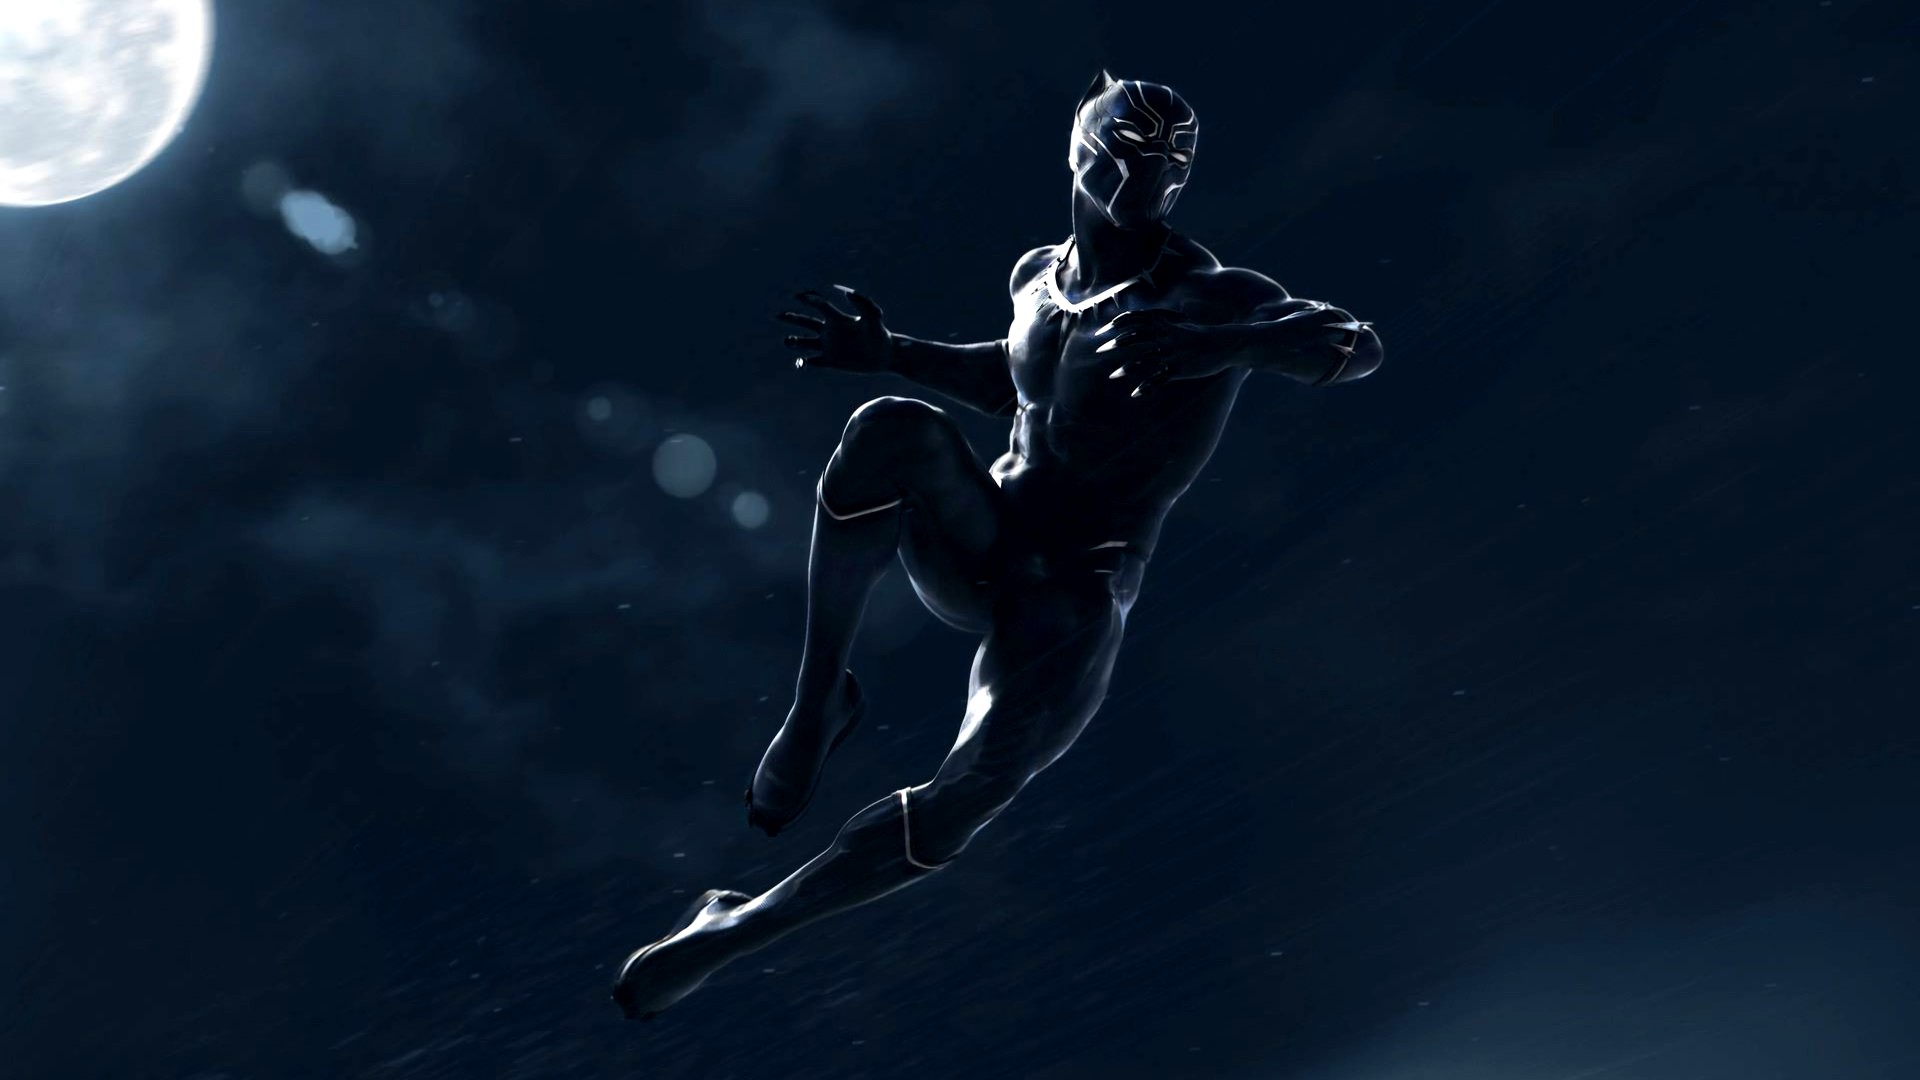 Wallpapers Black Panther Superhero with high-resolution 1920x1080 pixel. You can use this poster wallpaper for your Desktop Computers, Mac Screensavers, Windows Backgrounds, iPhone Wallpapers, Tablet or Android Lock screen and another Mobile device